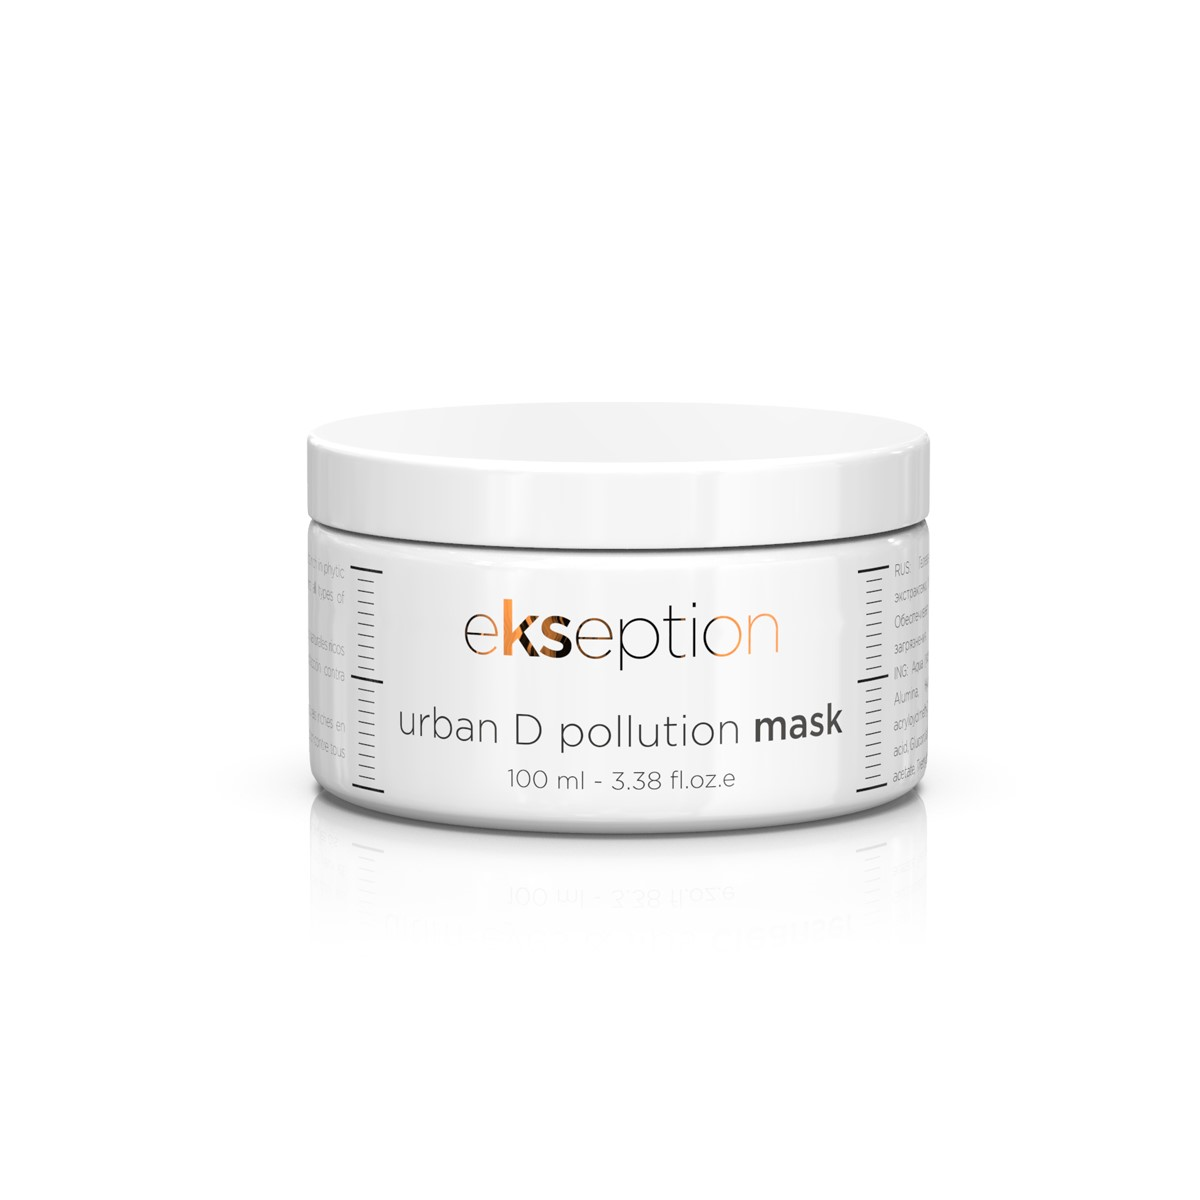 Protective detoxifying mask URBAN D POLLUTION MASK